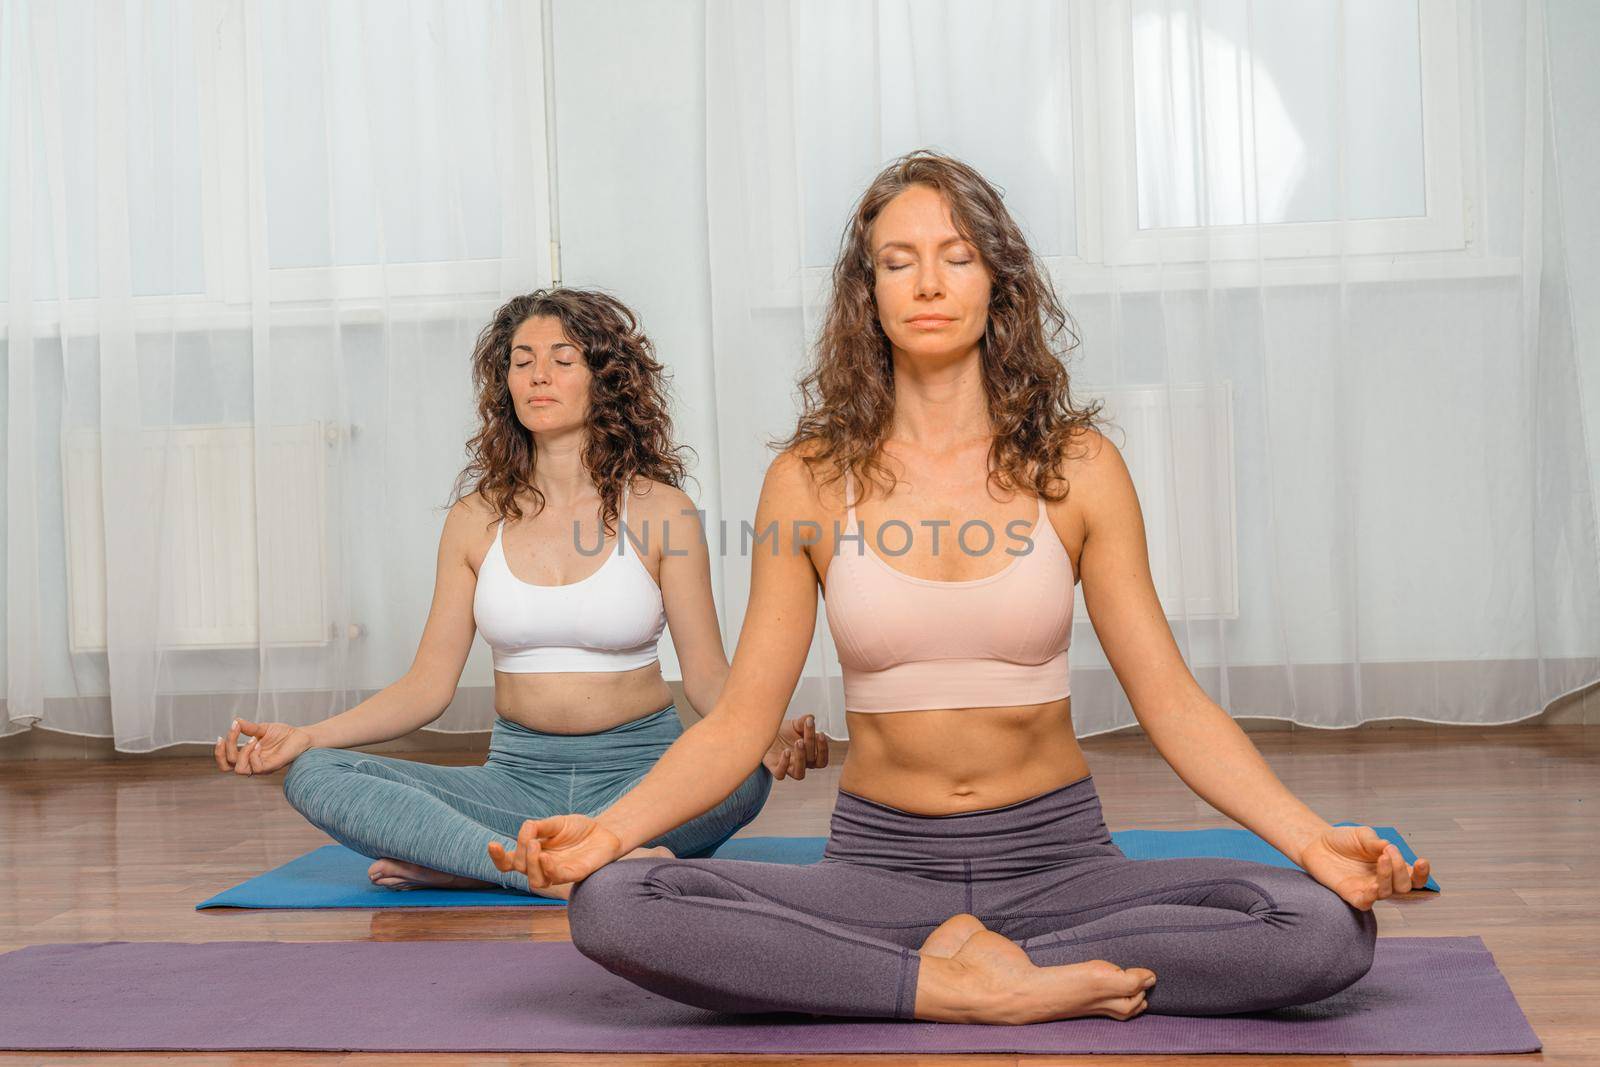 Two attractive athletic girls train asana yoga pose on mats on a light background. A group of young women stretch out in the gym. Healthy lifestyle concept.